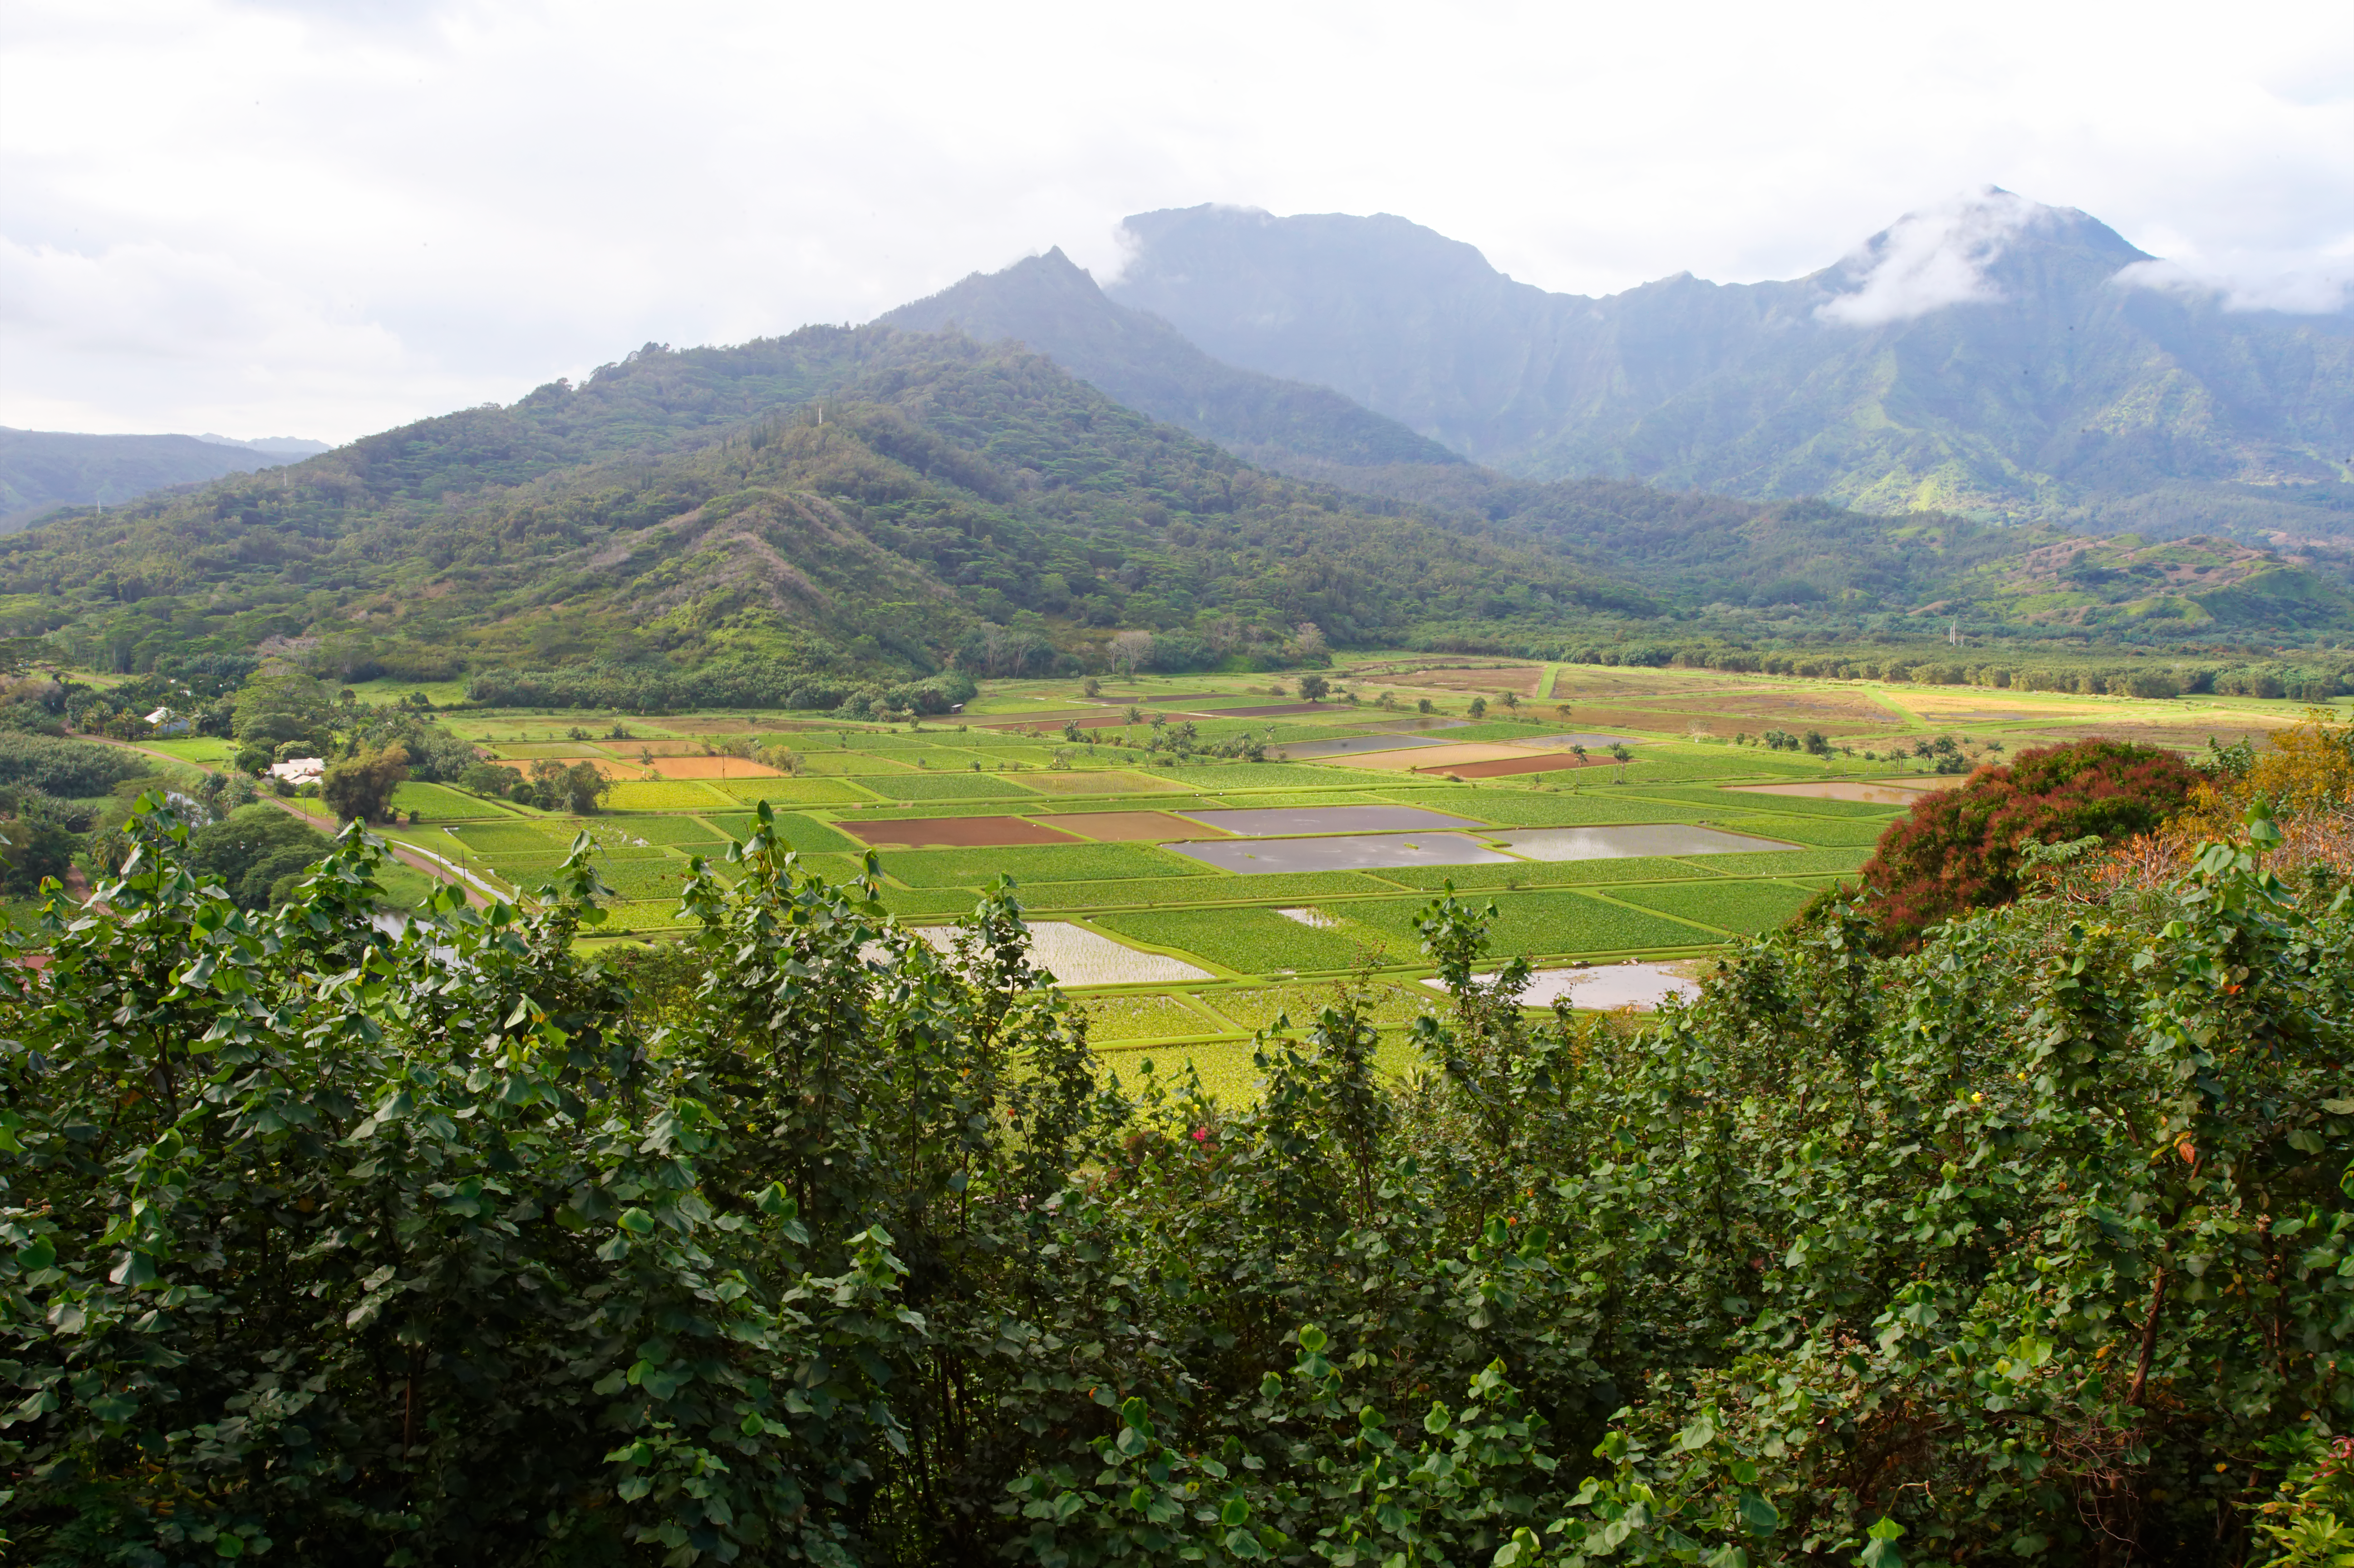 A view of the Hanalei River Valley